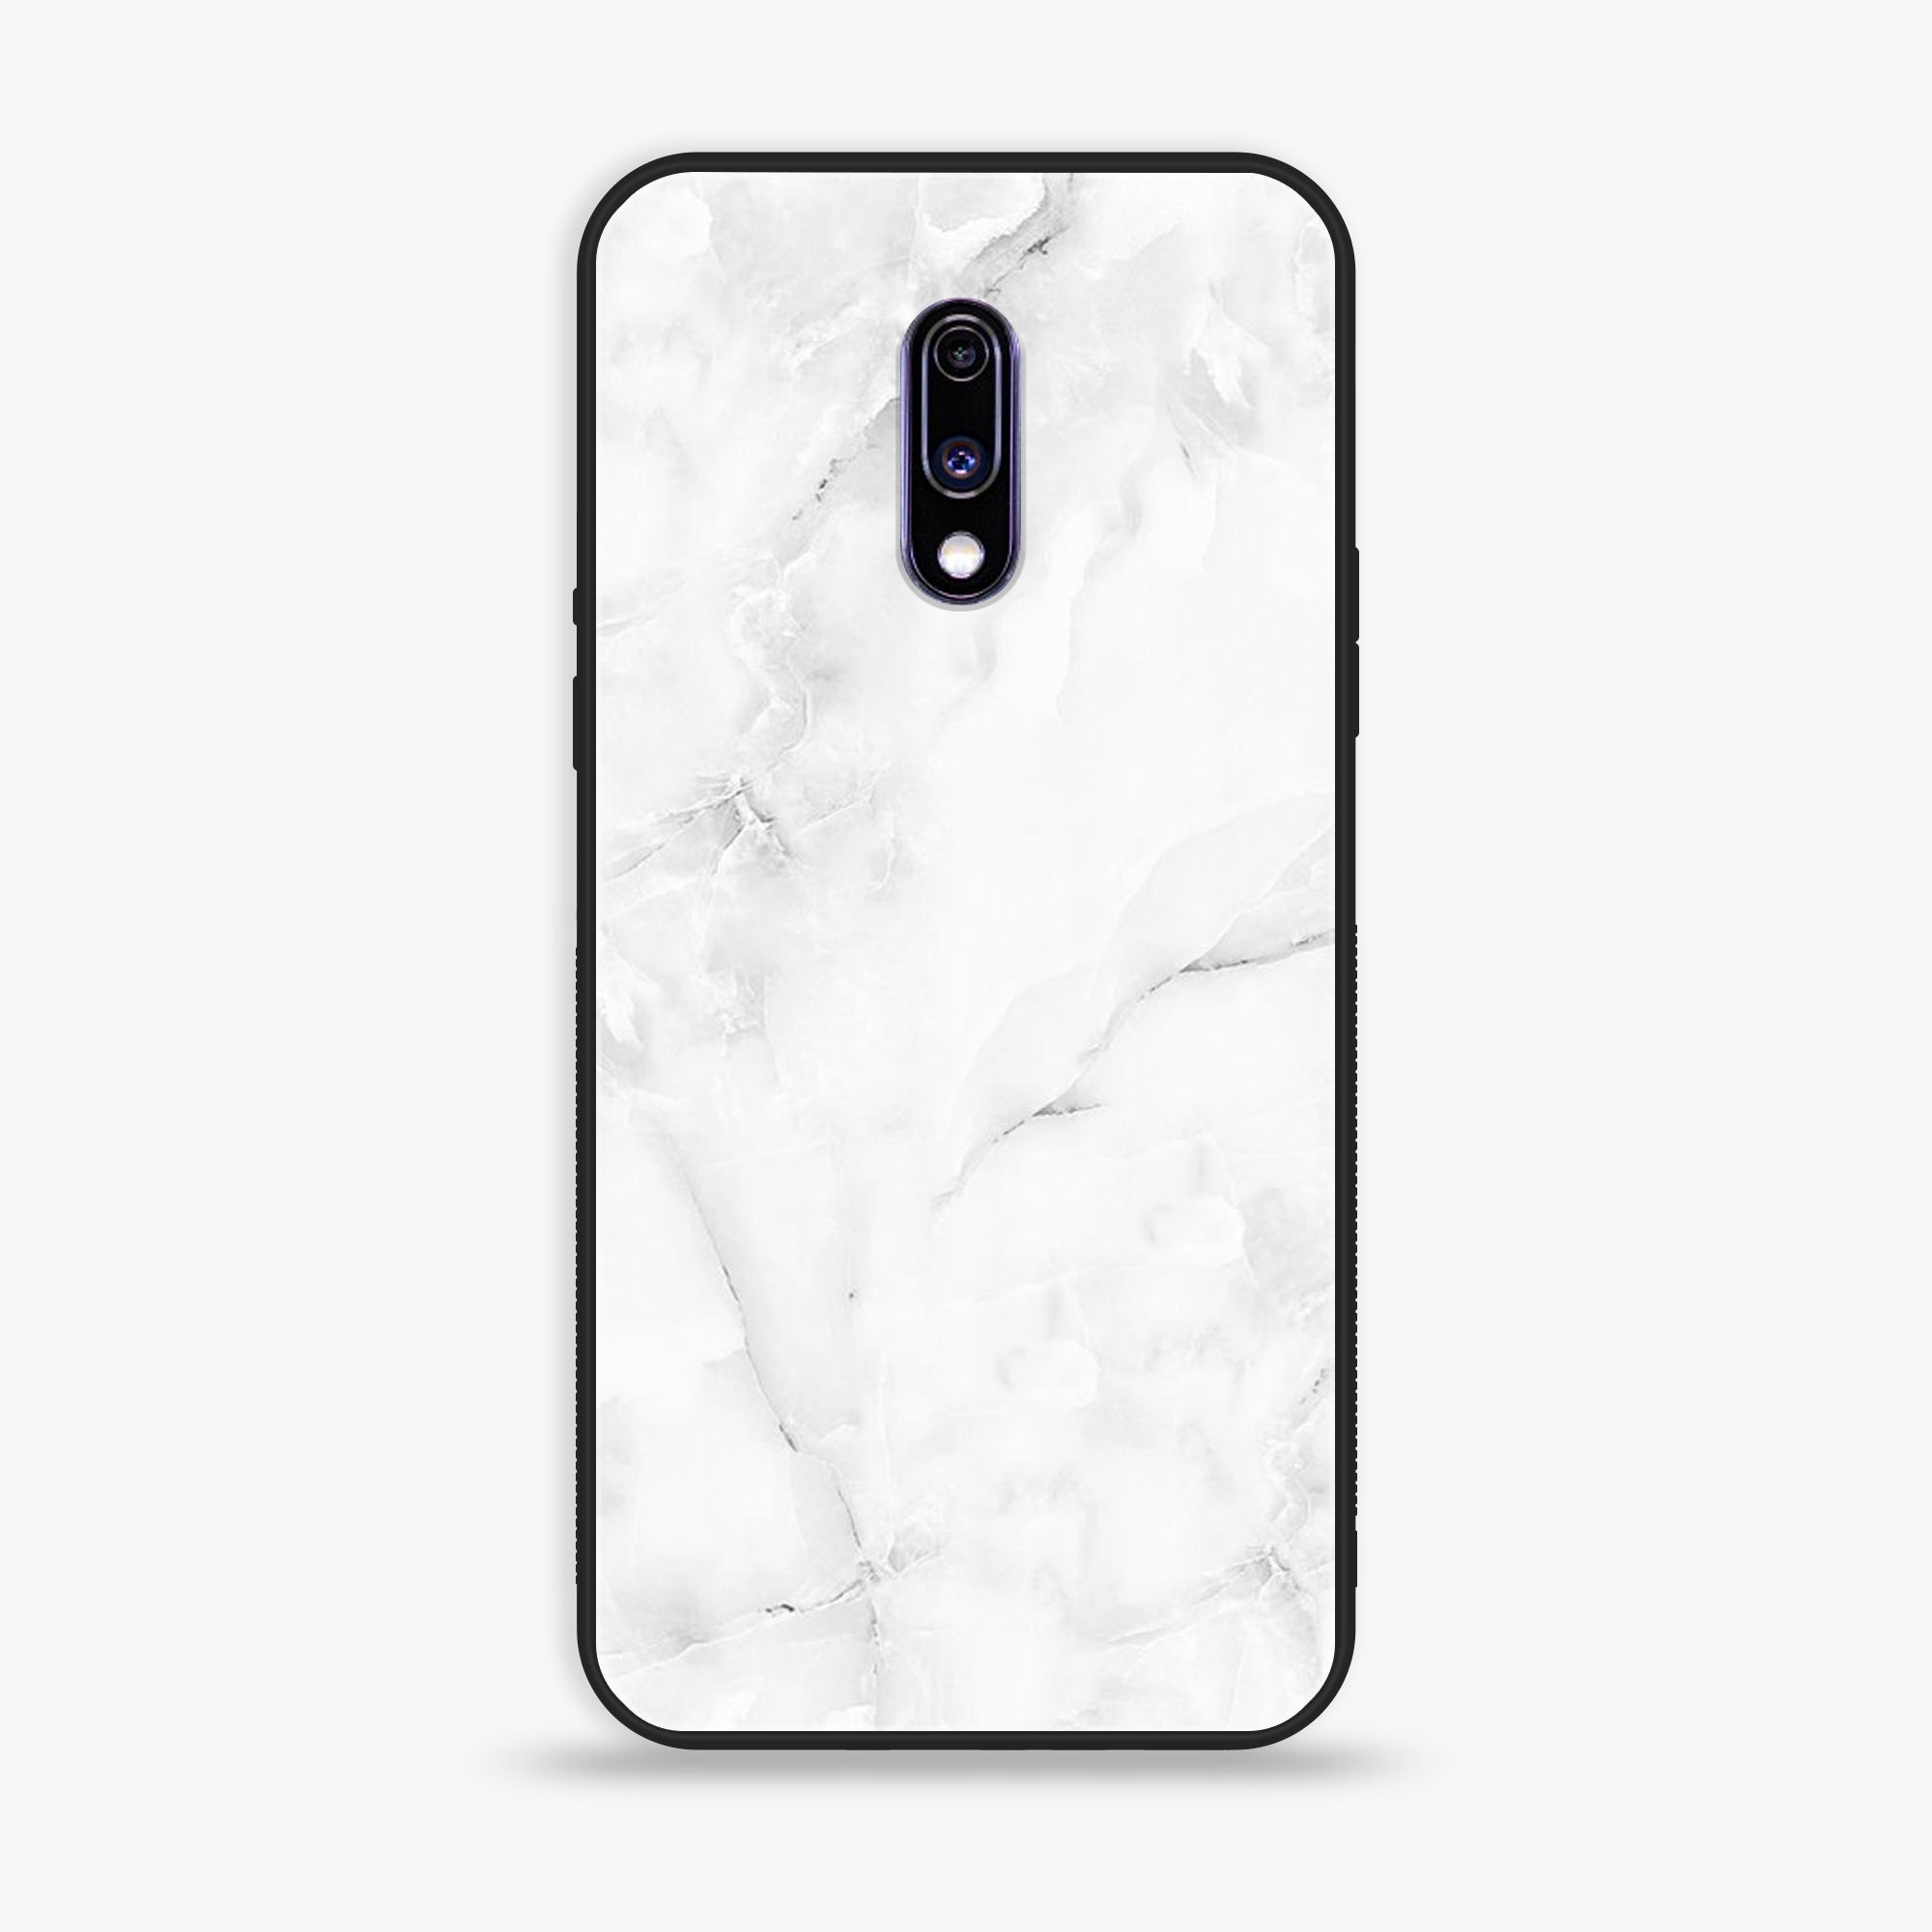 OnePlus 7 - White Marble Series - Premium Printed Glass soft Bumper shock Proof Case